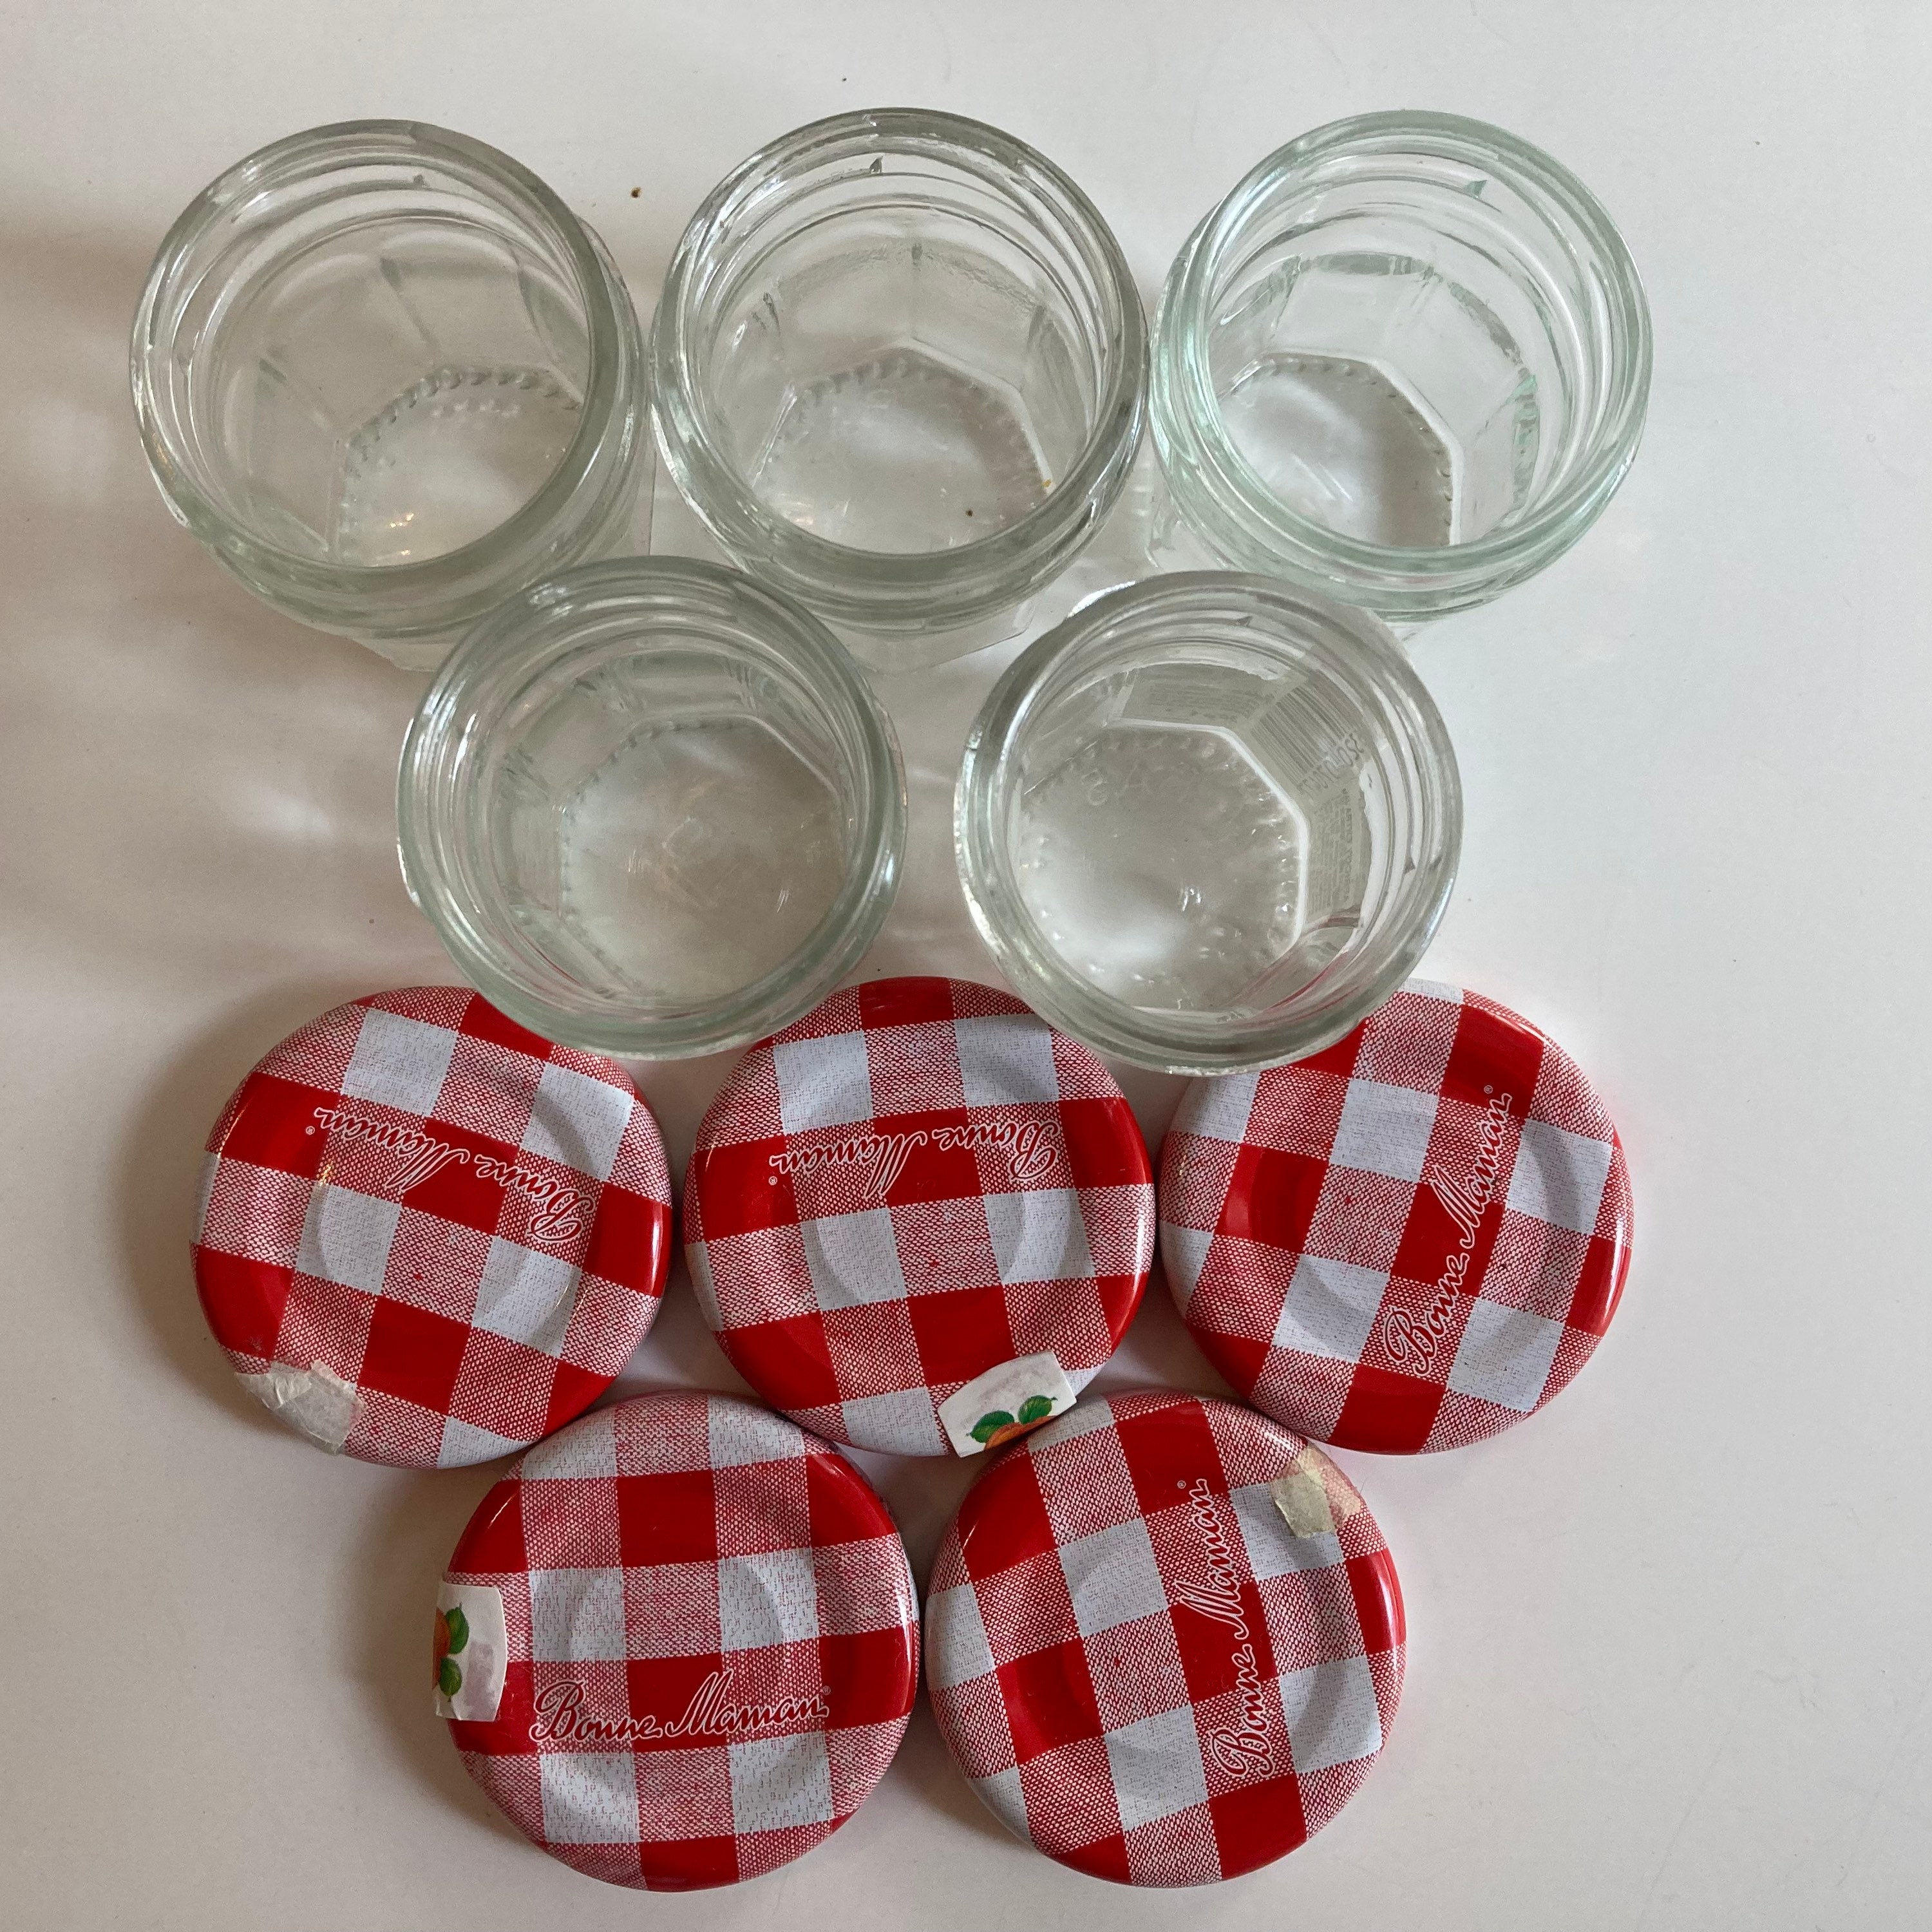 Recycled Upcycled Mini 1 Oz. Bonne Maman Jelly Jam Jars for 